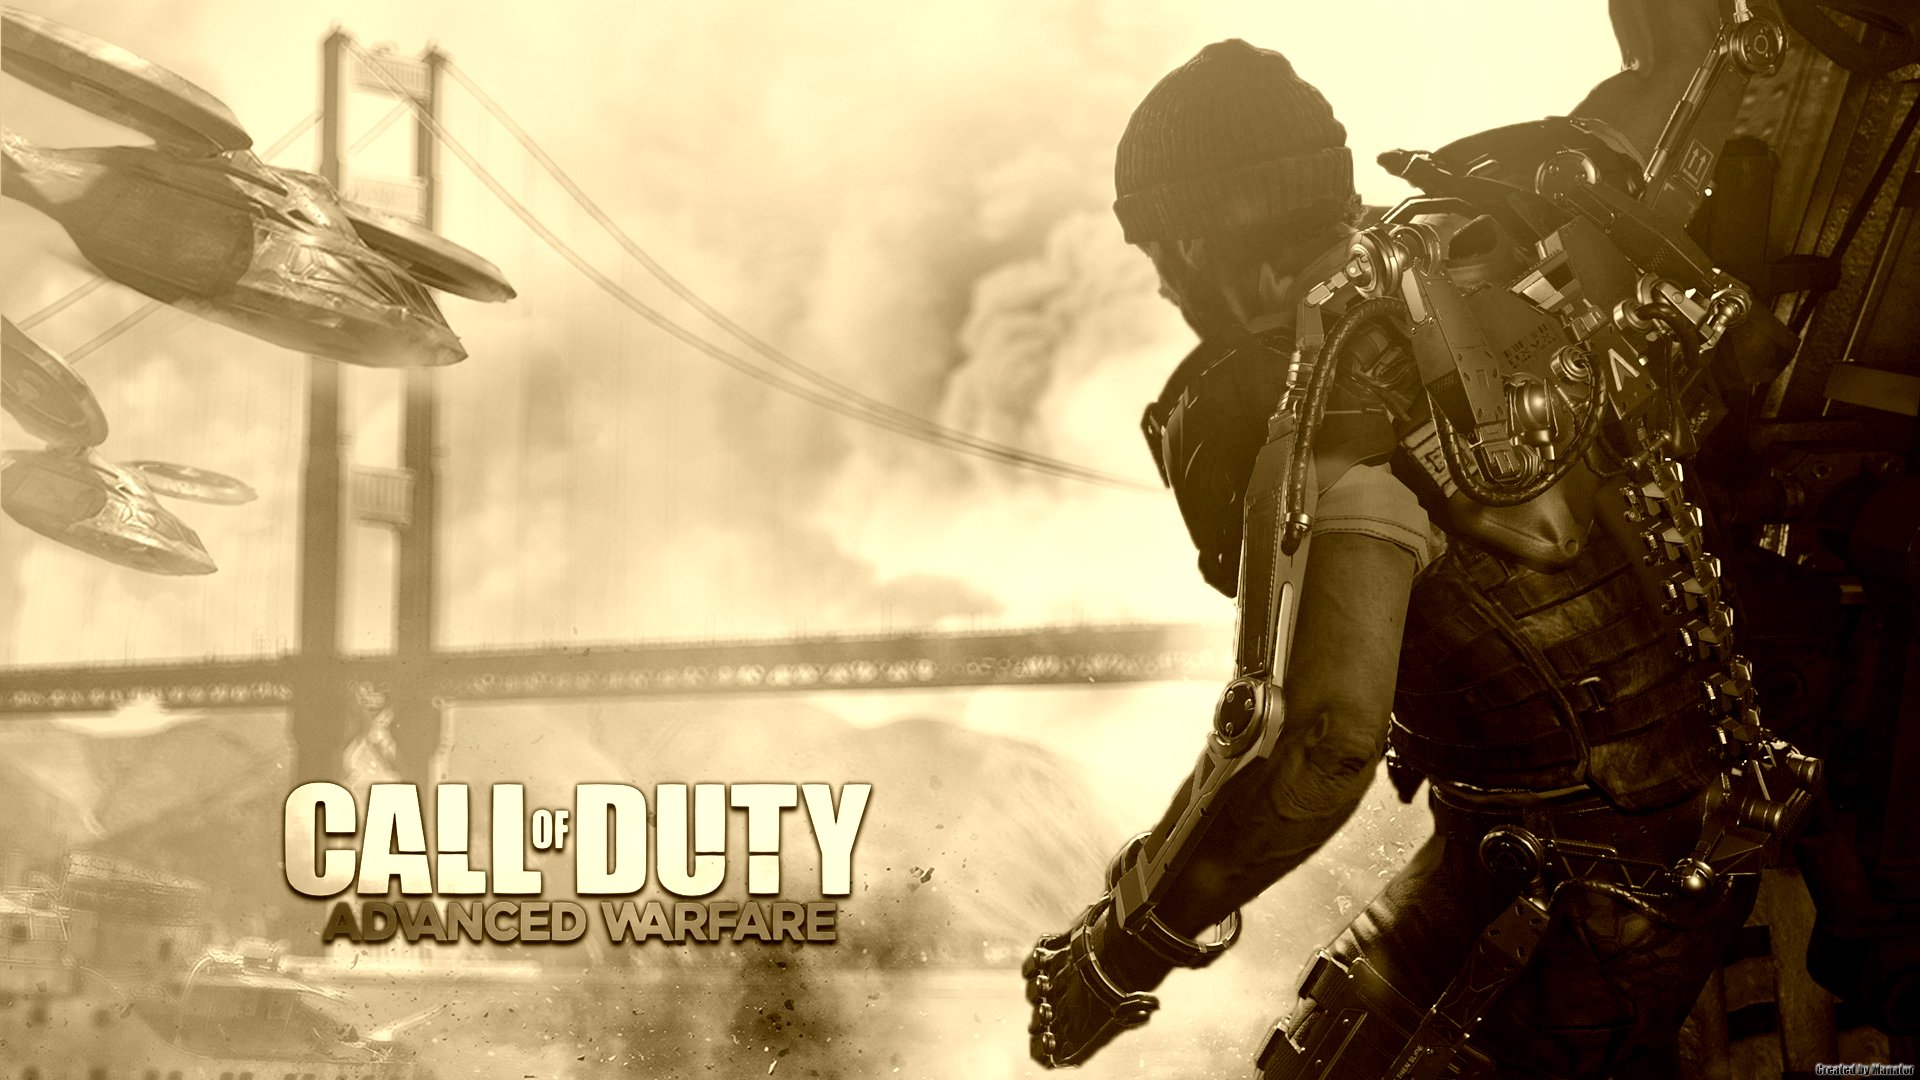 call of duty advanced warfare wallpaper,action adventure game,movie,font,pc game,poster